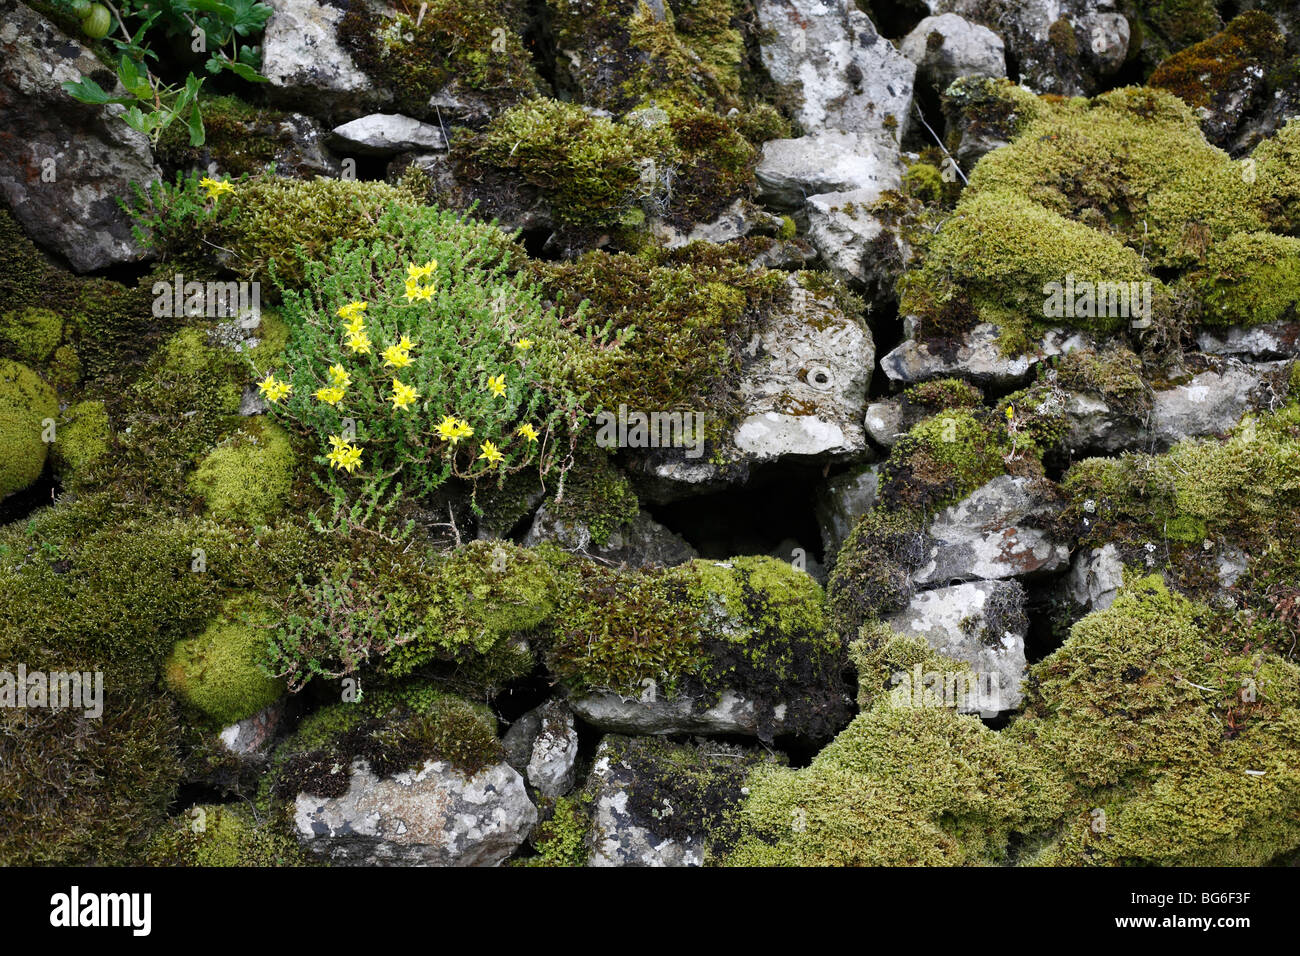 Dry stone wall with moss and flowers, Ilam, Derbyshire, July 2009 Stock Photo